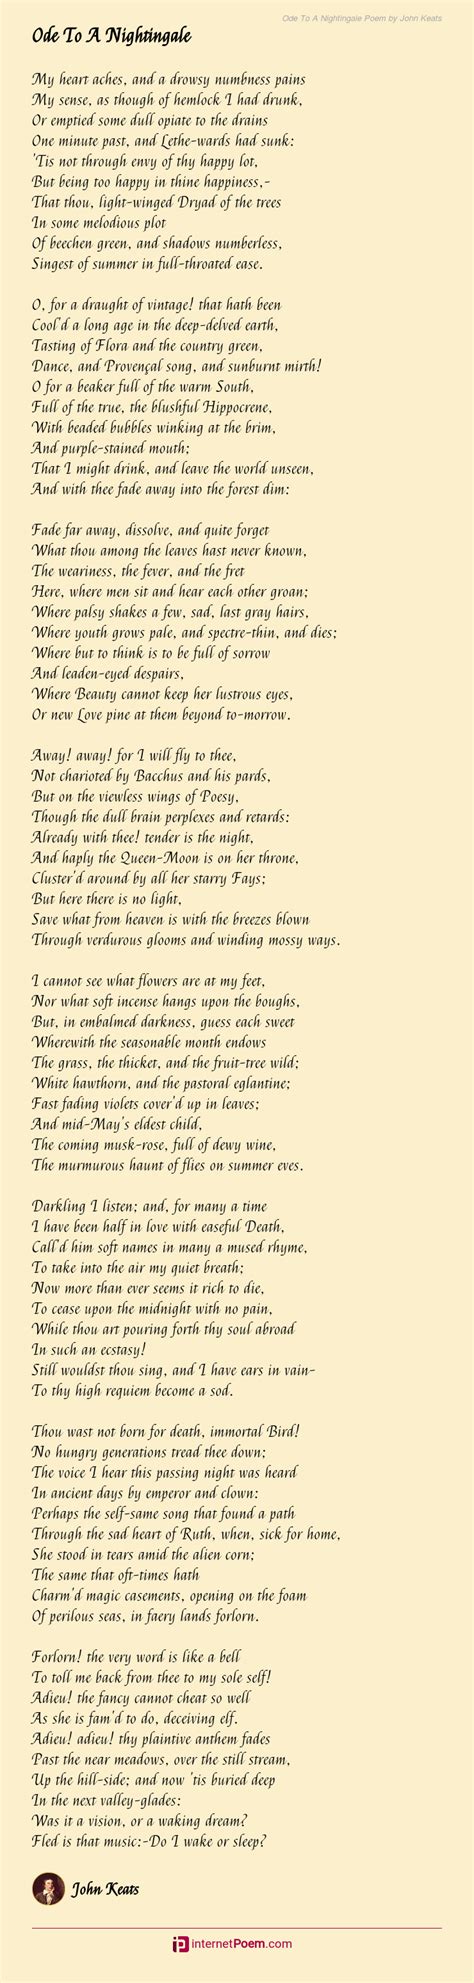 Ode To A Nightingale Poem By John Keats